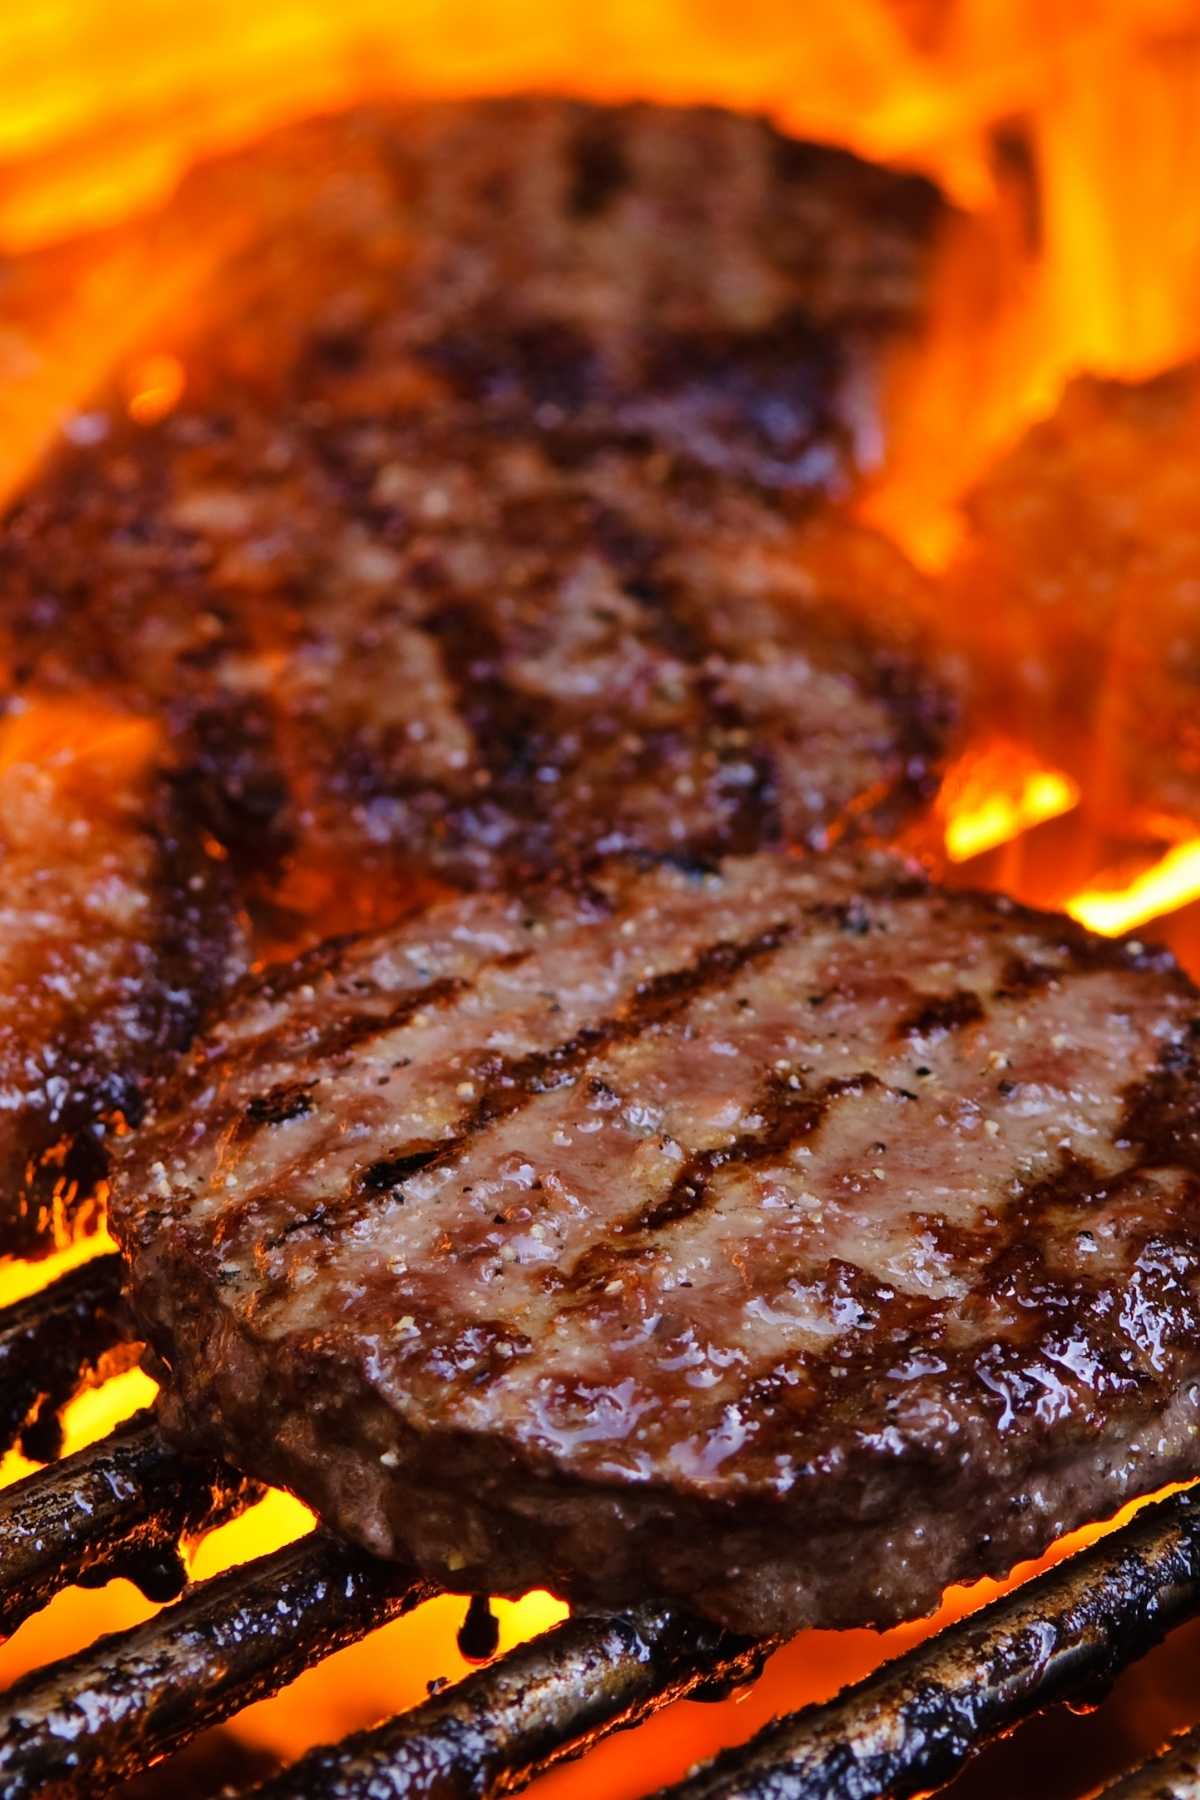 Optage erektion fond How Long to Grill Burgers (Burger Grill Time) - TipBuzz